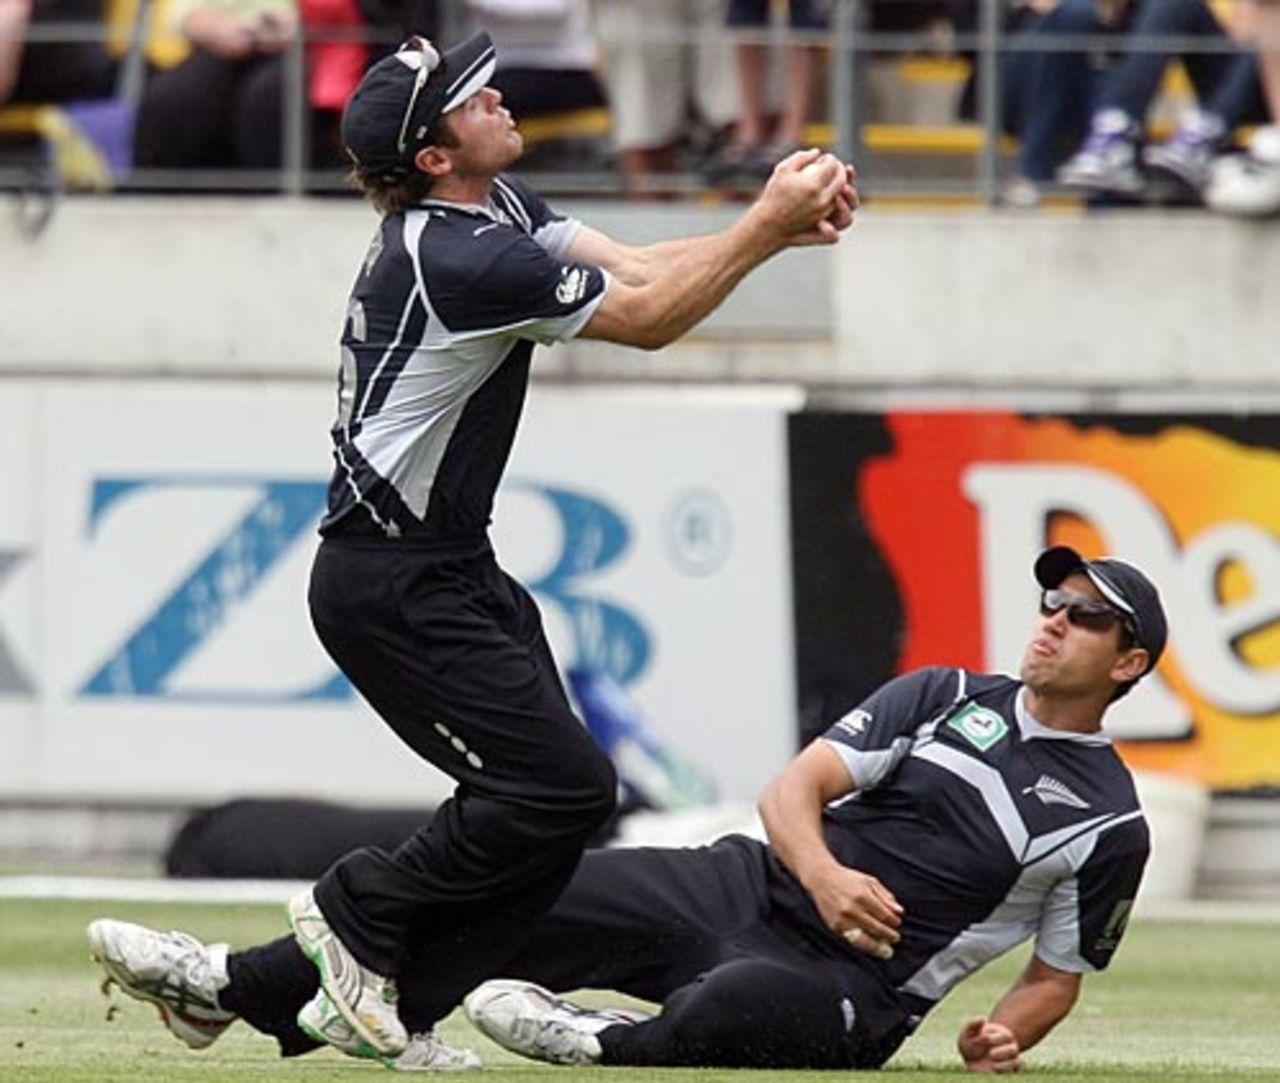 Kyle Mills avoids a collision with Ross Taylor, New Zealand v West Indies, 3rd ODI, Wellington, January 7, 2009